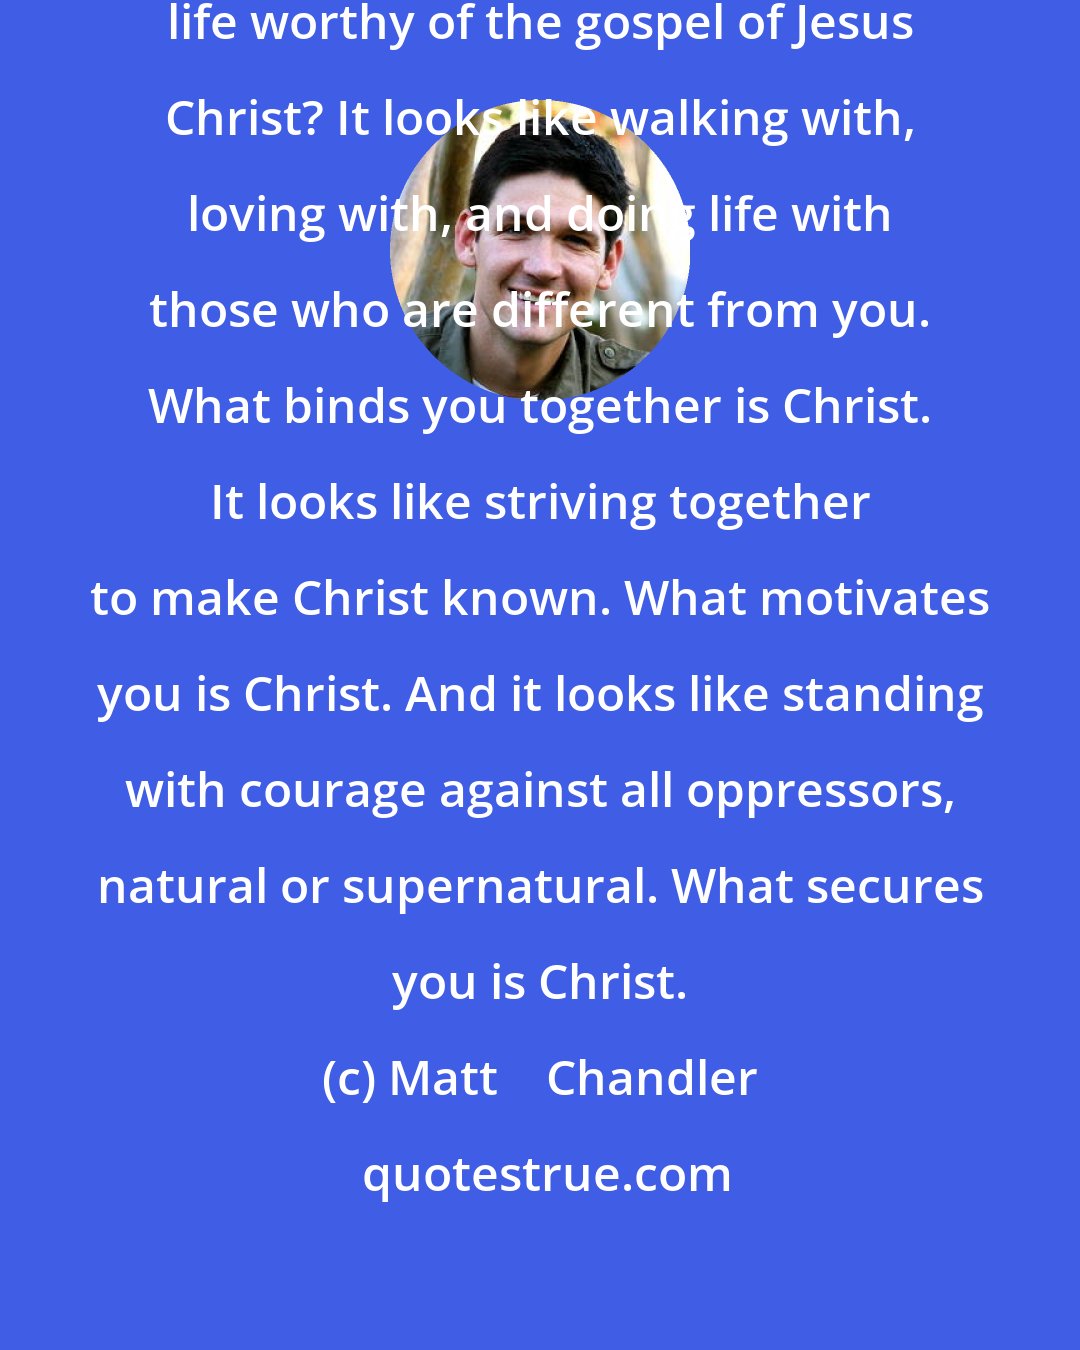 Matt    Chandler: So what does it look like to live a life worthy of the gospel of Jesus Christ? It looks like walking with, loving with, and doing life with those who are different from you. What binds you together is Christ. It looks like striving together to make Christ known. What motivates you is Christ. And it looks like standing with courage against all oppressors, natural or supernatural. What secures you is Christ.